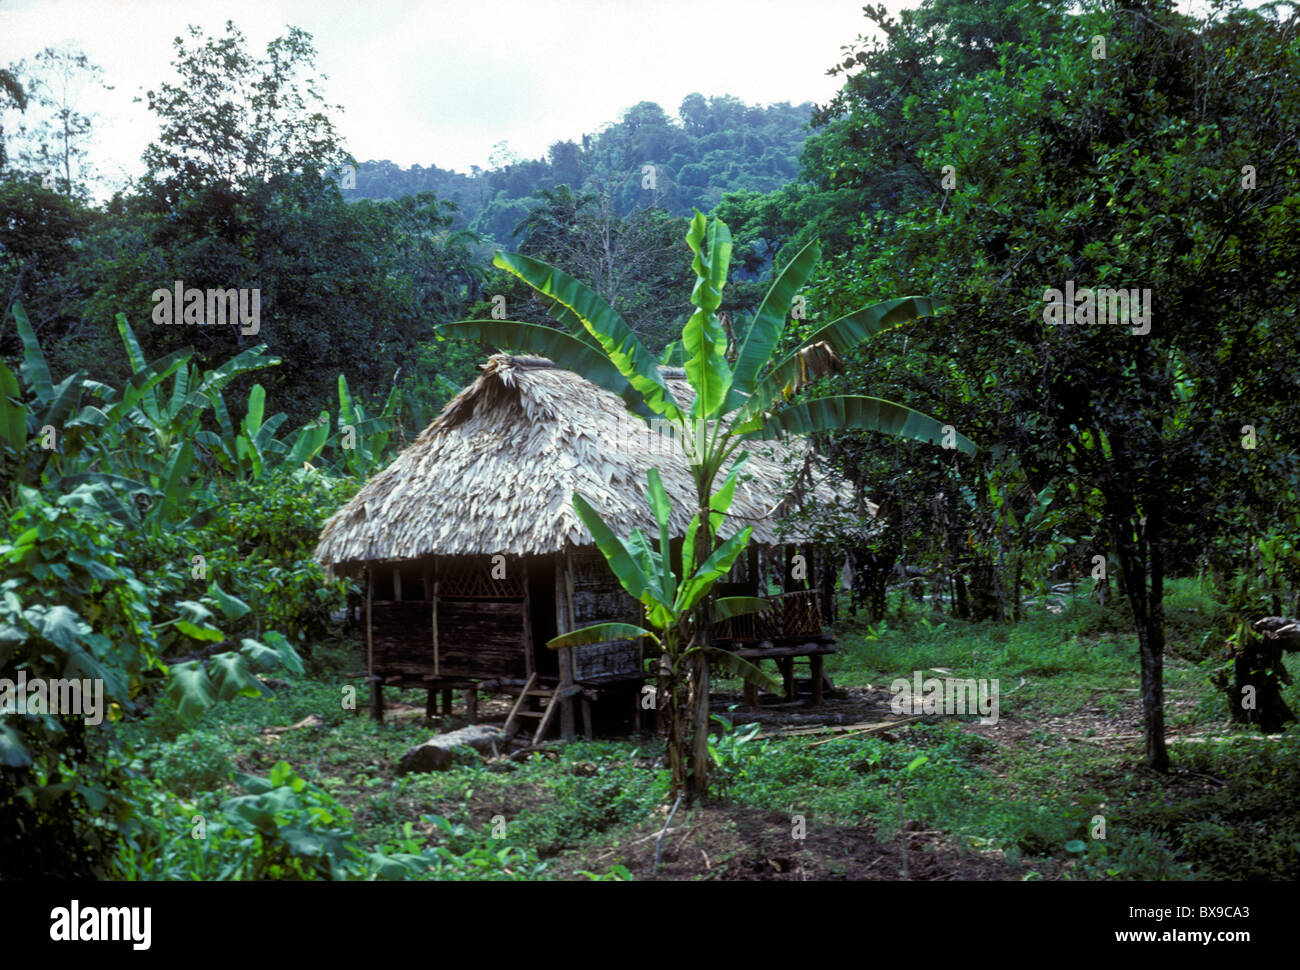 Bribri Indian home, thatched roof hut on stilts, house on stilts, Talamanca Indigenous Reservation, Limon Province, Costa Rica, Central America Stock Photo